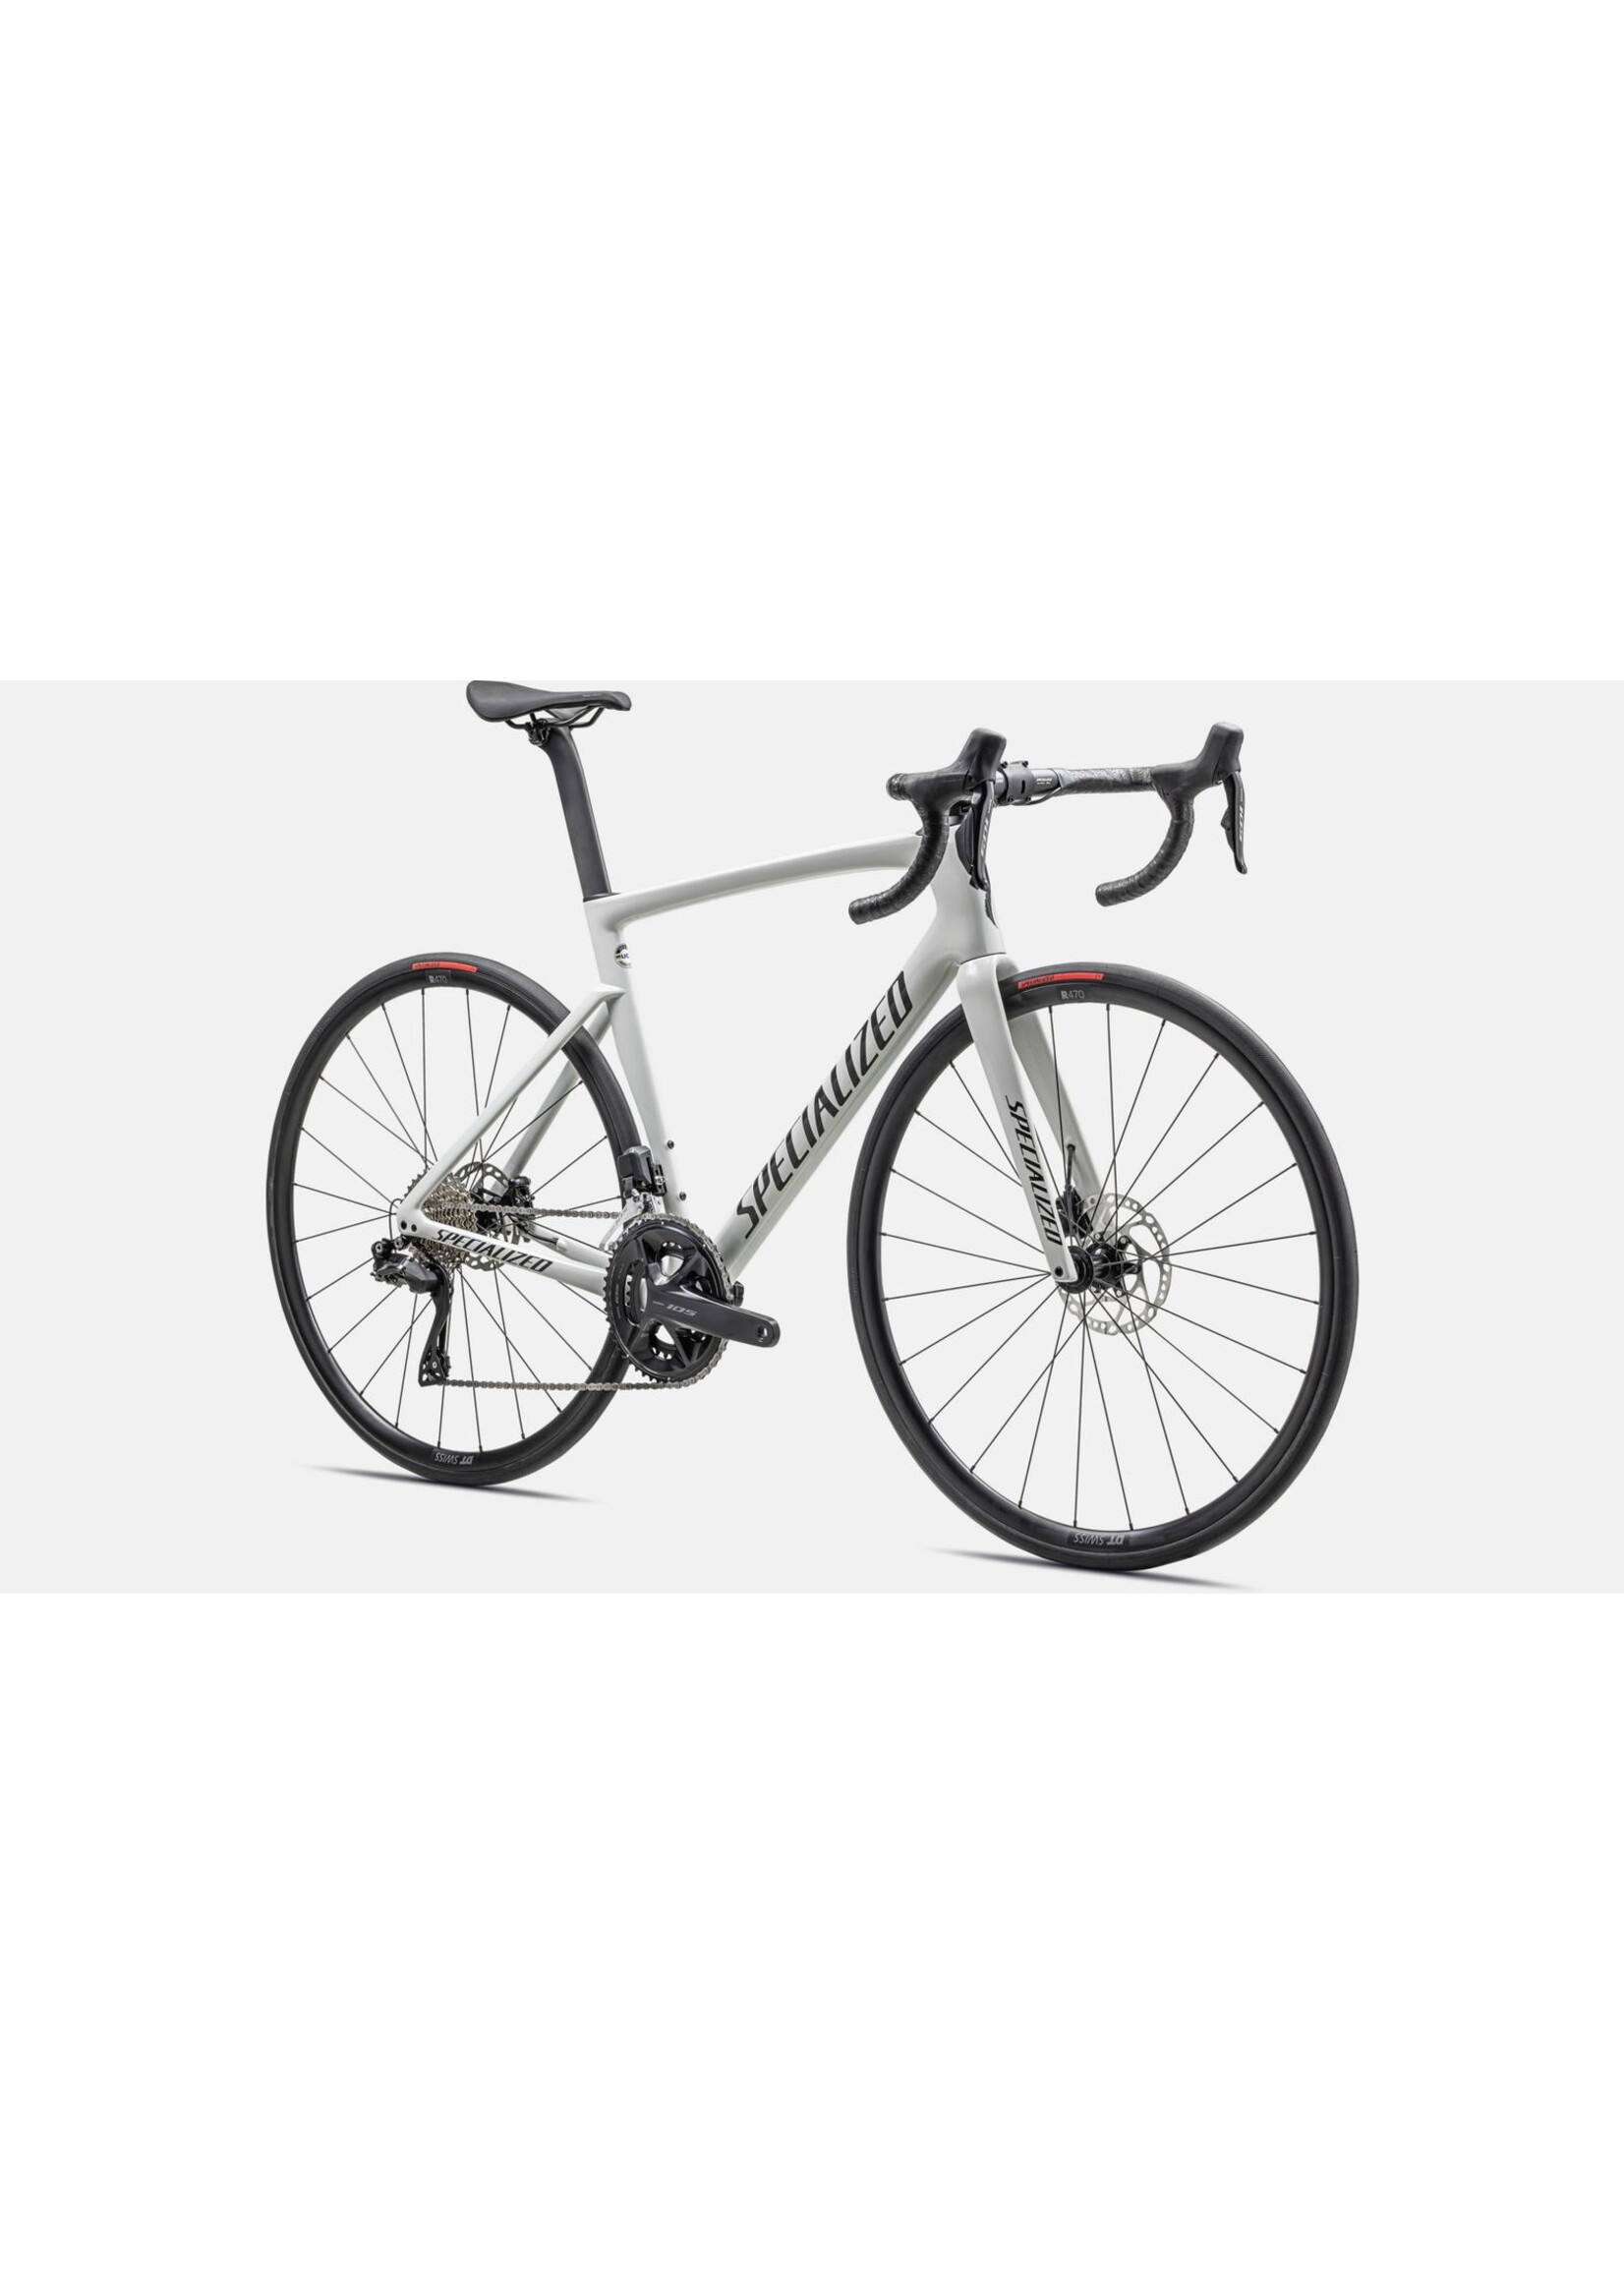 Specialized Tarmac SL7 Comp - Shimano 105 Di2 - Sourland Cycles